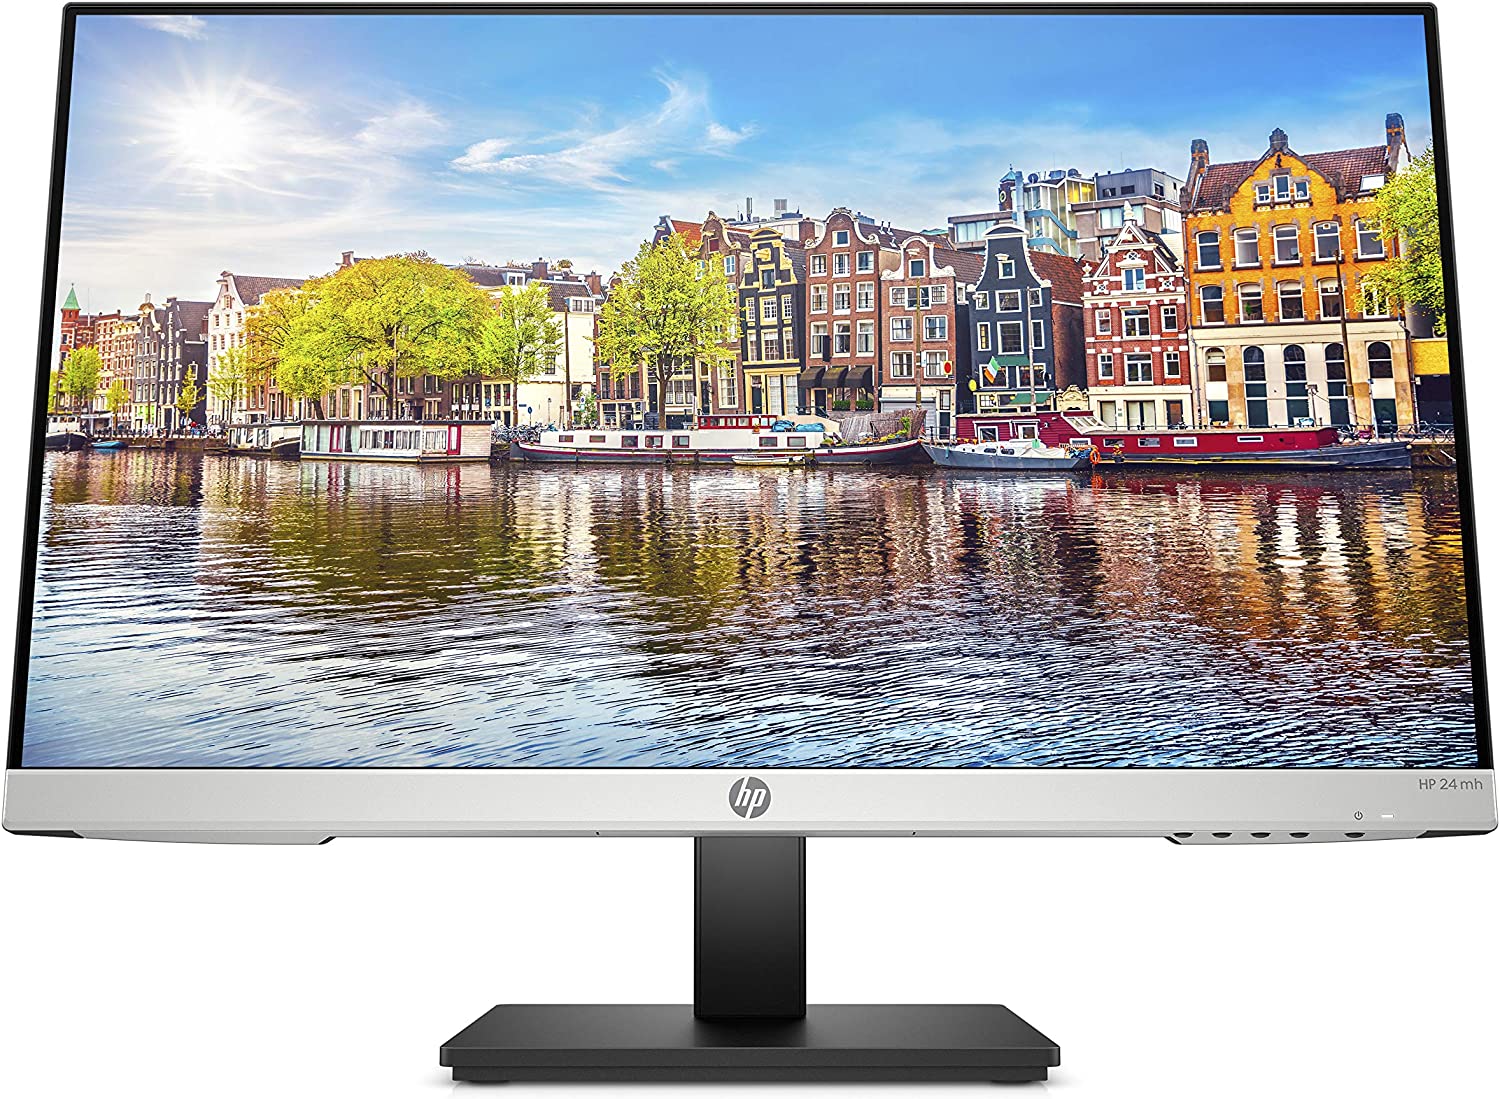 HP 24mh FHD Monitor Computer Monitor with 23.8 Inch IPS Display 1080p Built  In Speakers and VESA Mounting Height Tilt Adjustment for Ergonomic Viewing  HDMI and DisplayPort - MTech distributor